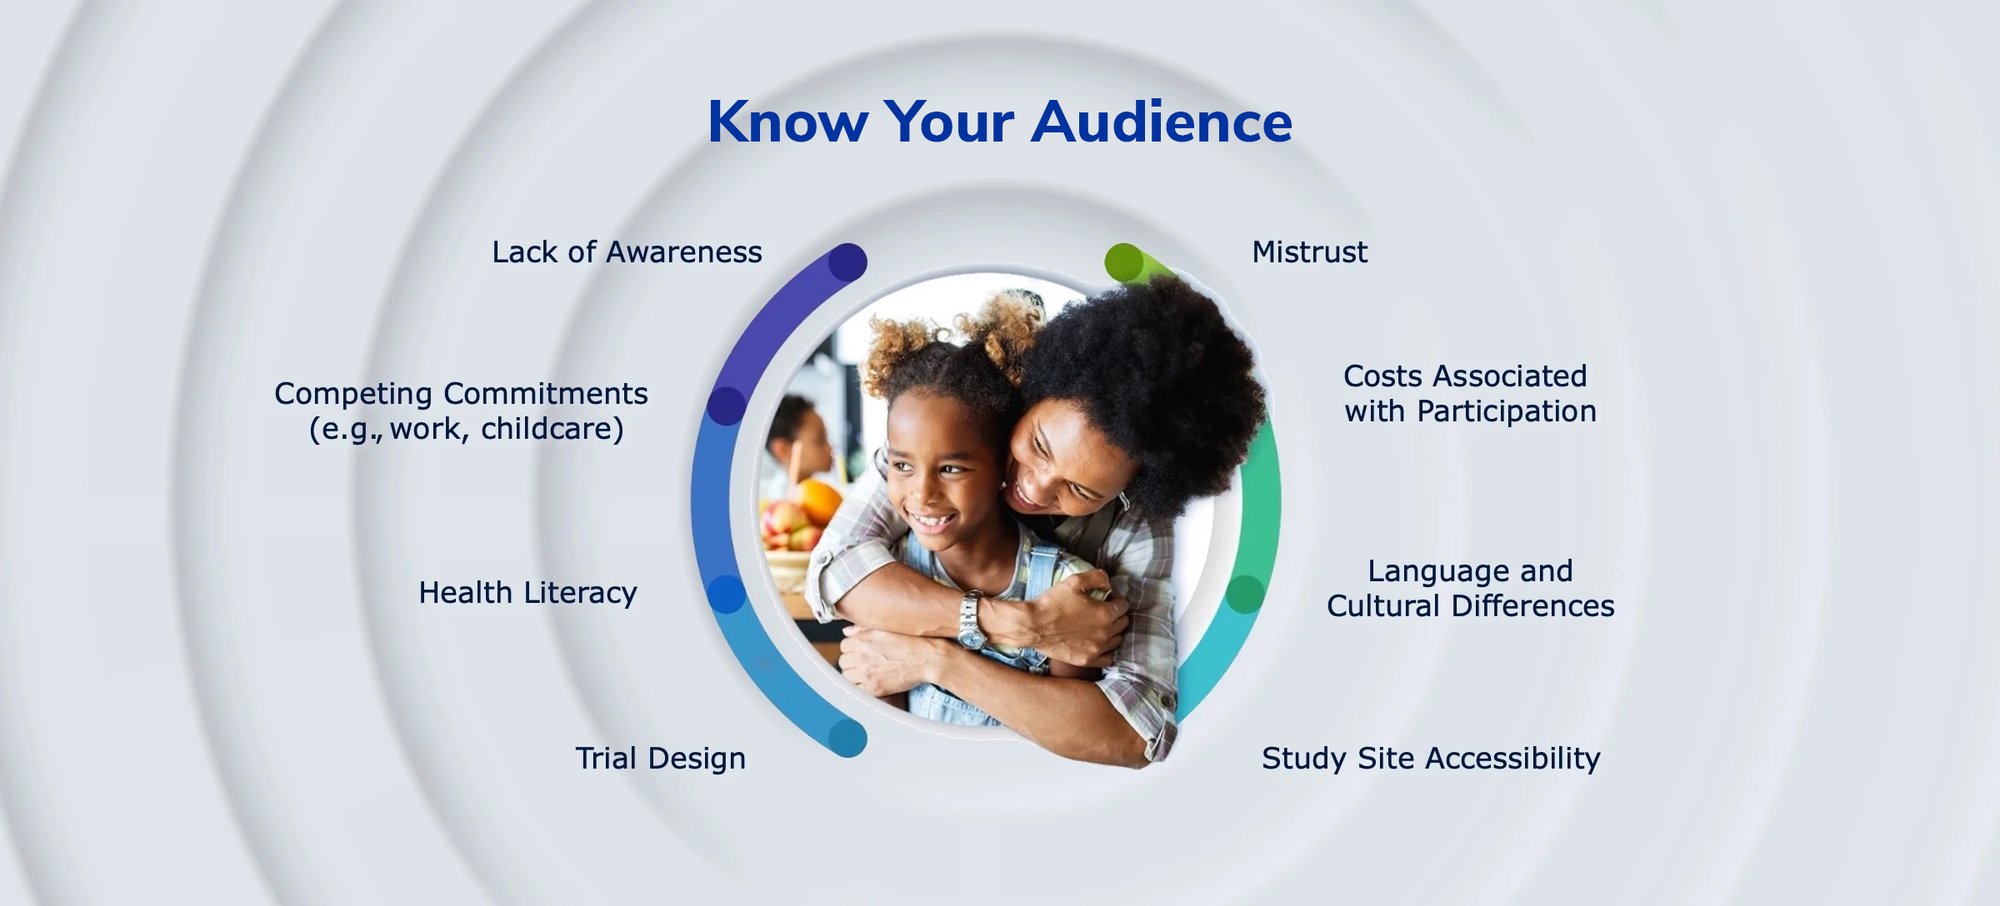 Know Your Audience - DEI Barriers